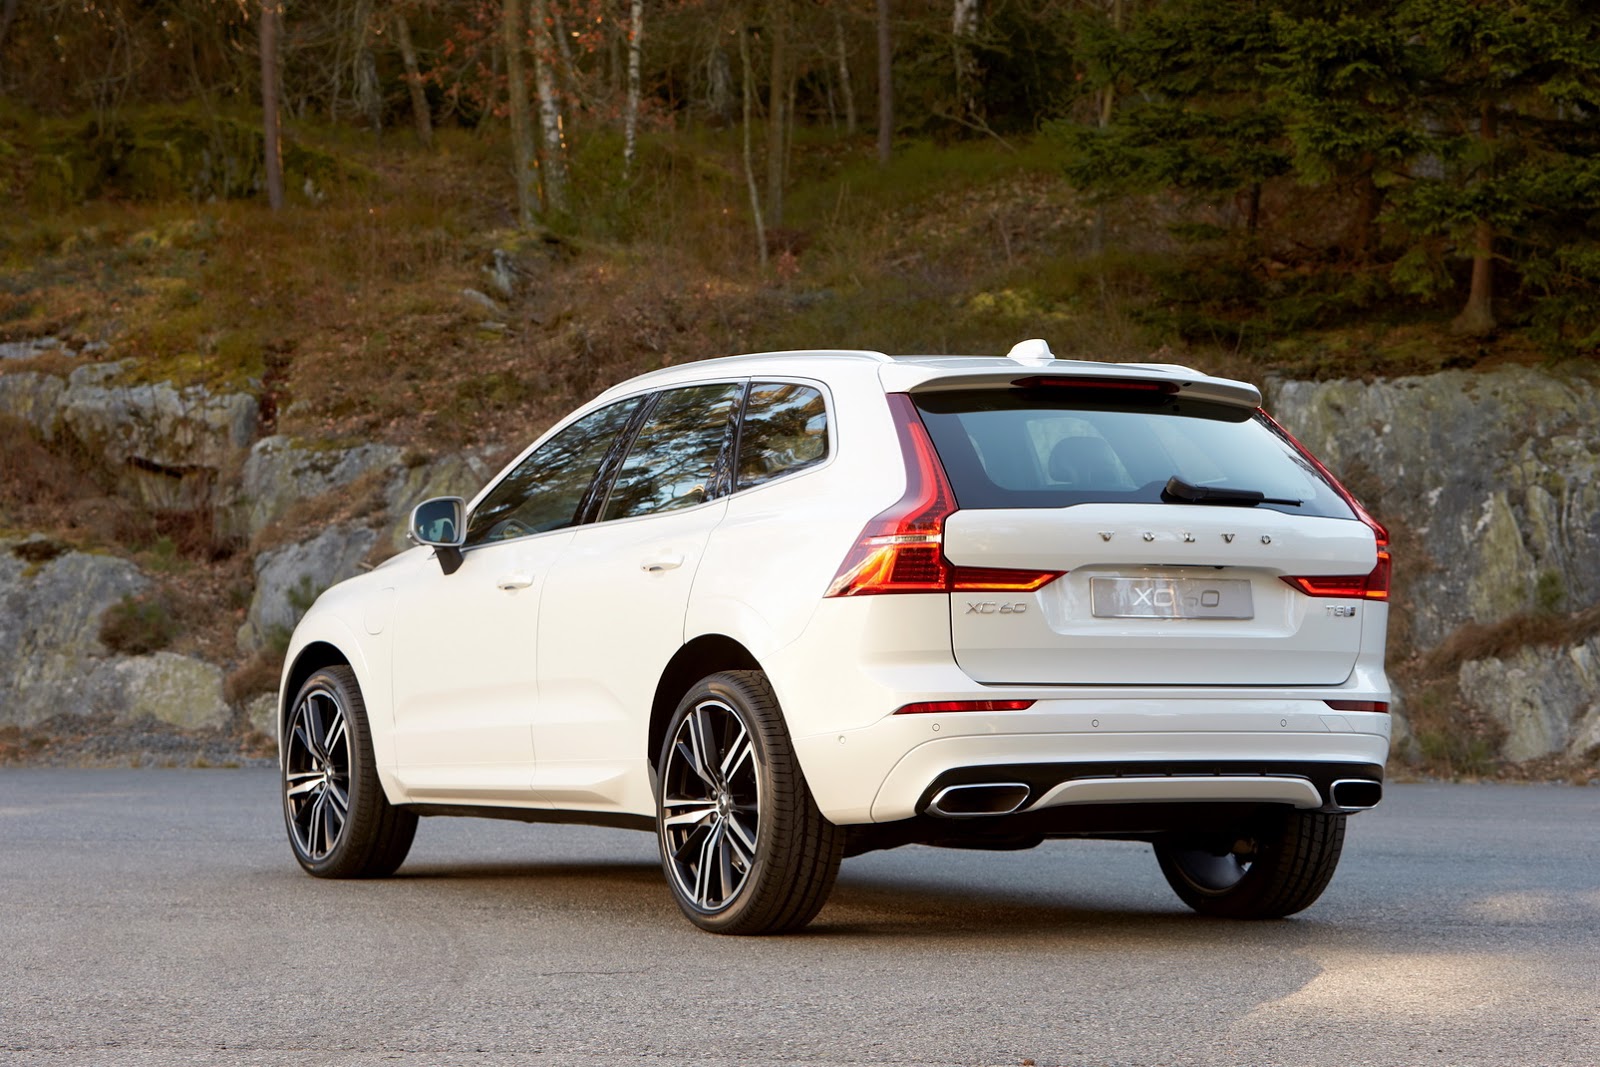 Volvo’s All-New XC60 SUV Makes Global Debut [80 Pics & Video] | Carscoops